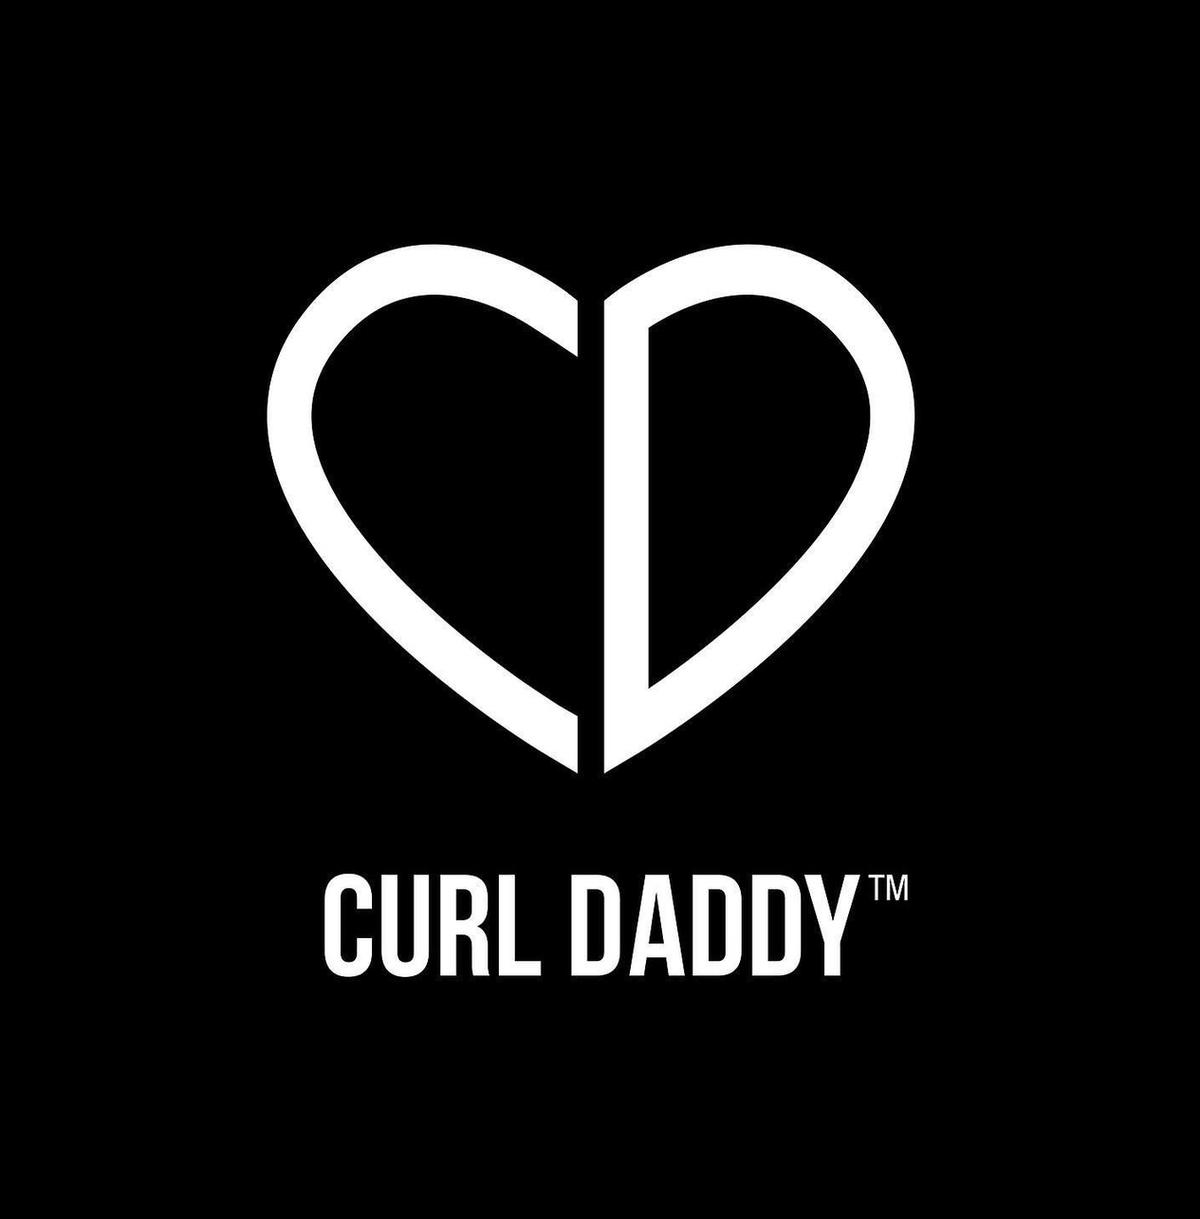 CURL DADDY's images